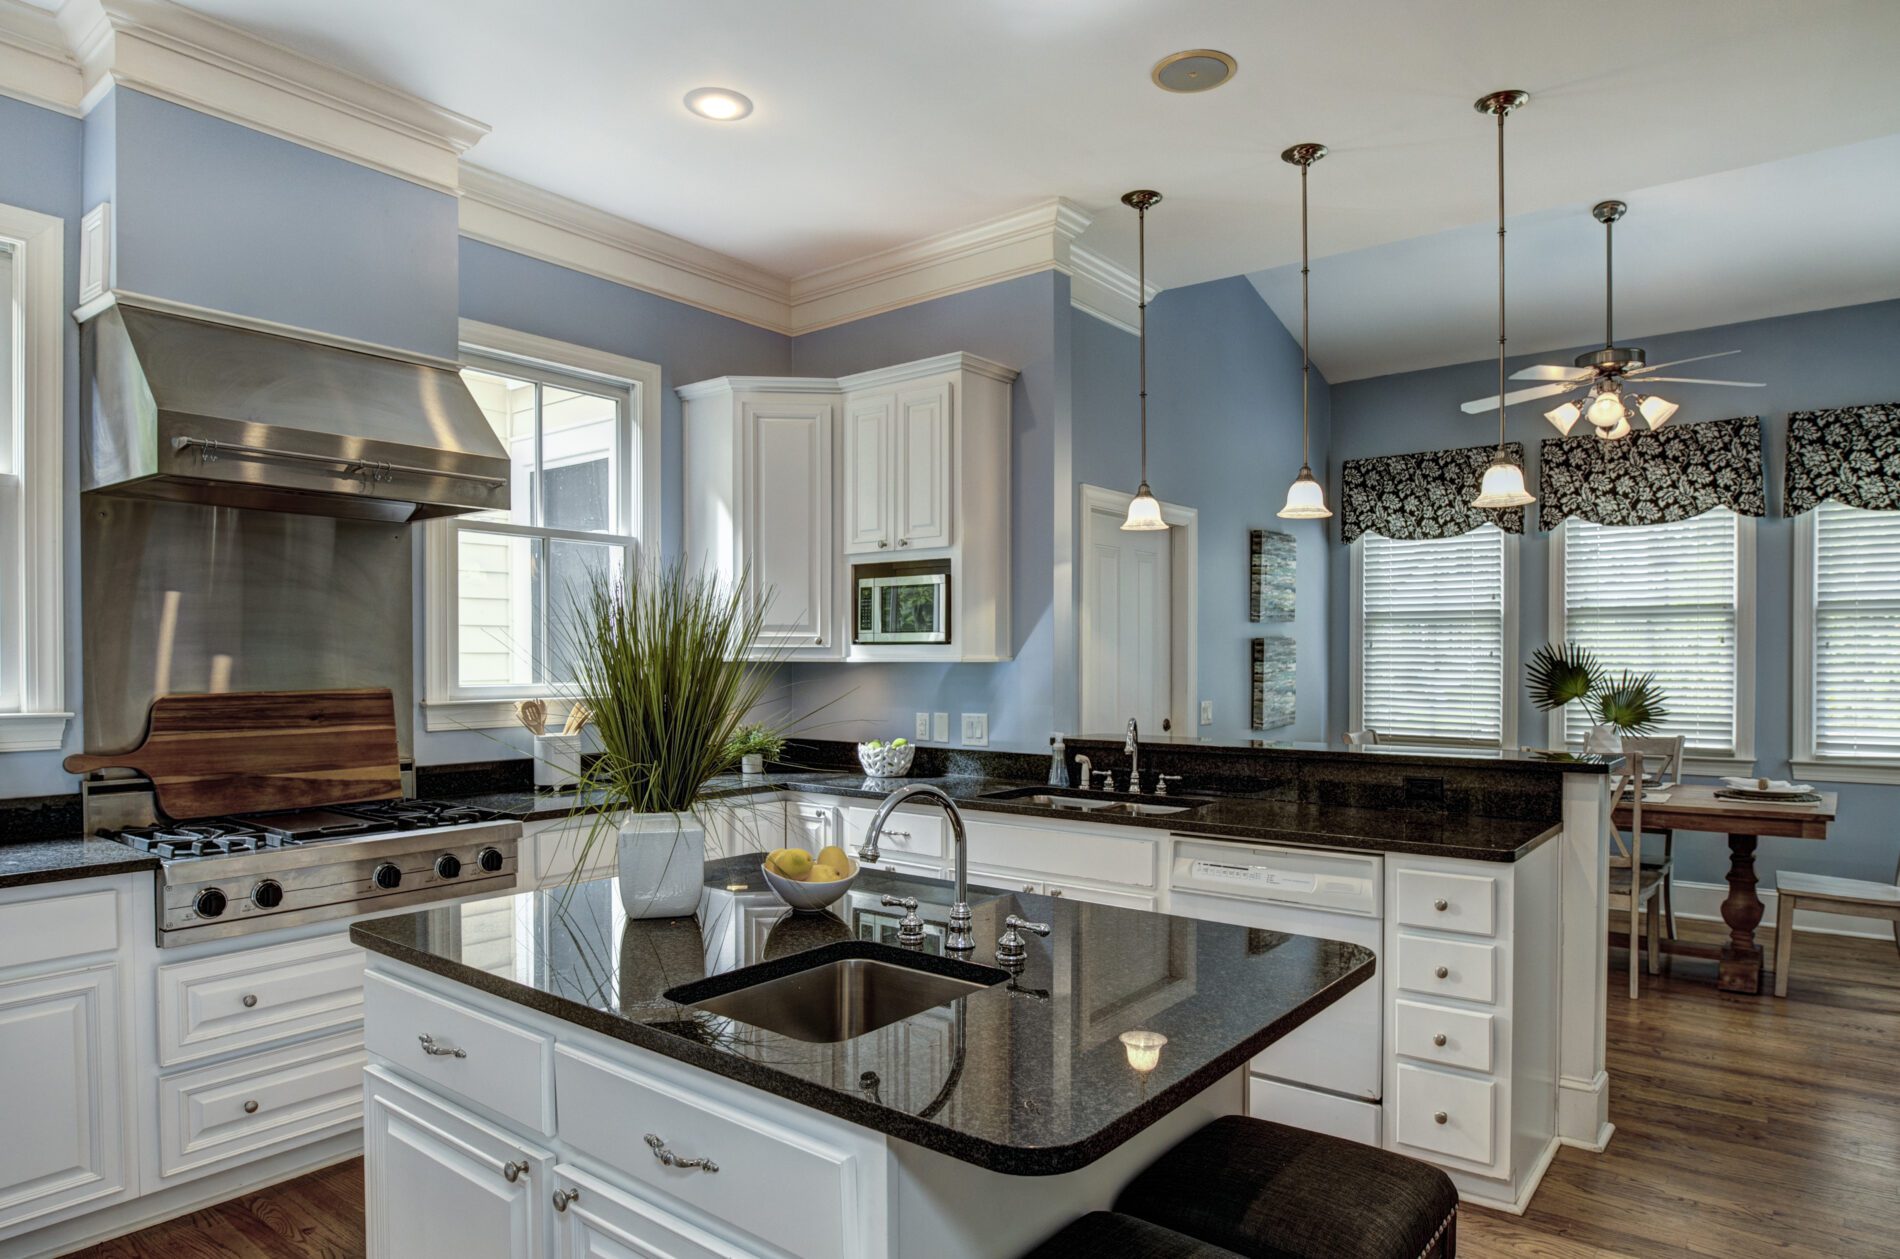 No.1 Best Home Kitchen Remodeling Texas - AMD Remodeling